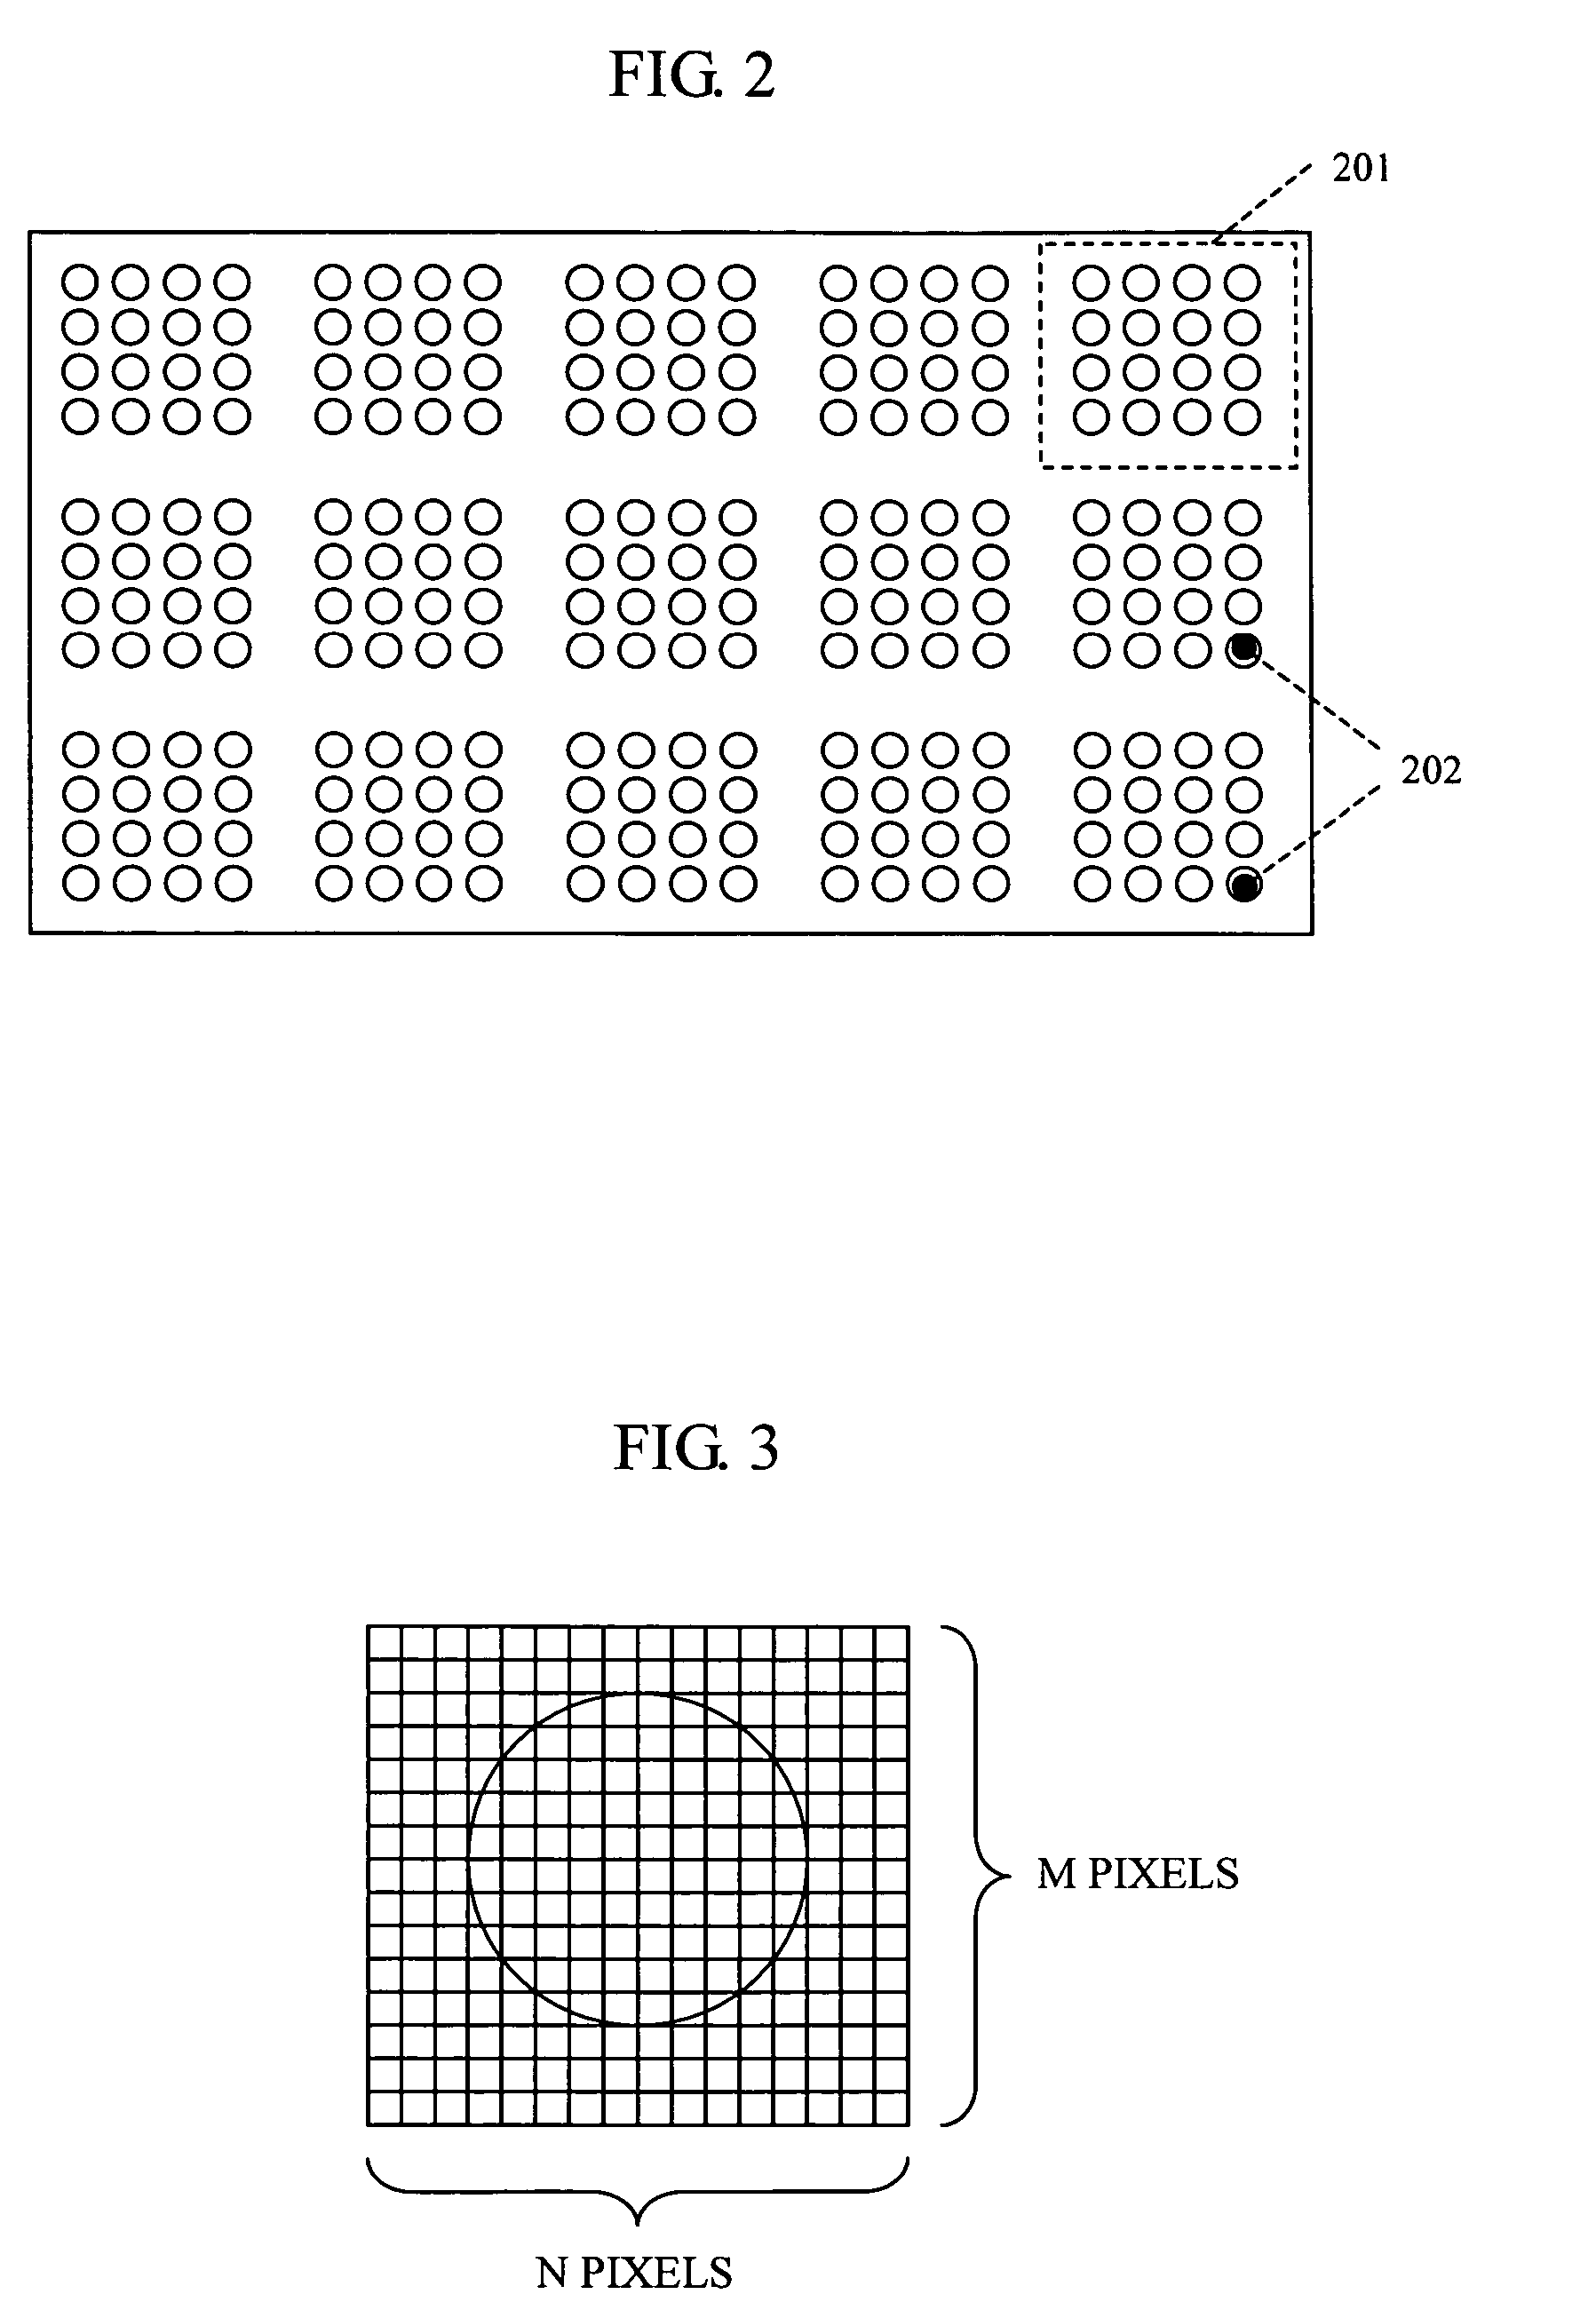 DNA microarray image analysis system